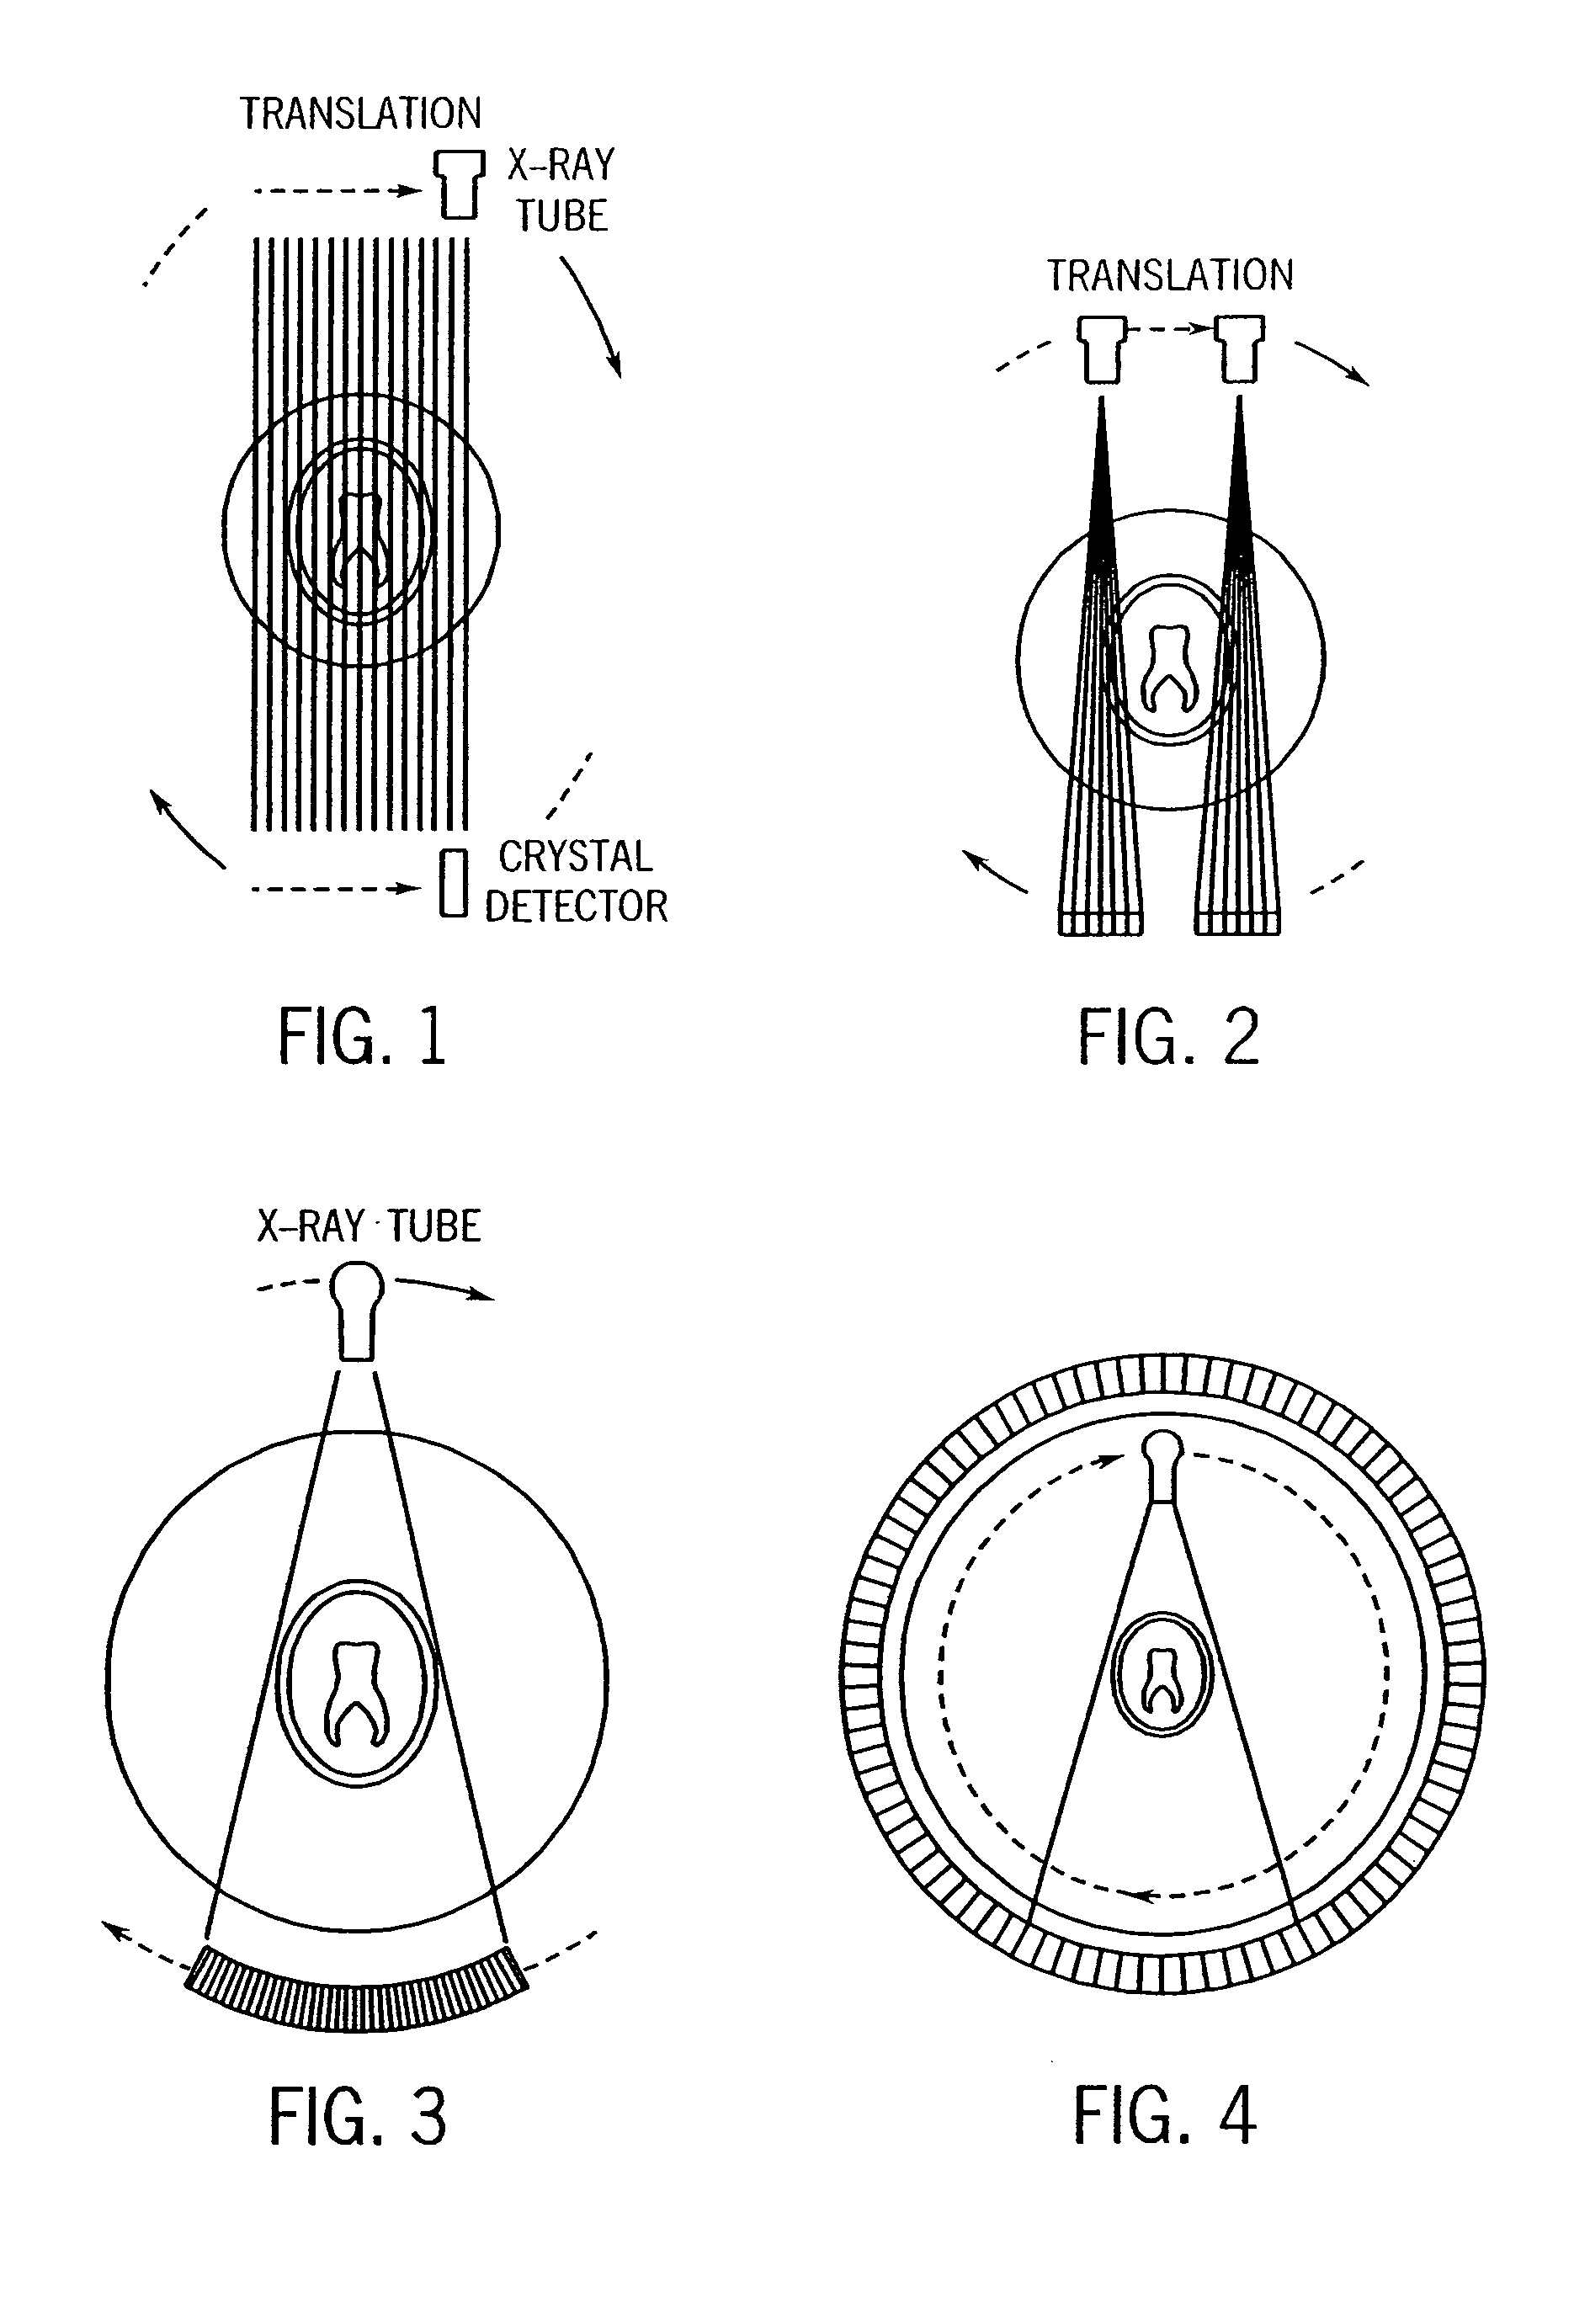 Cone-beam filtered backprojection image reconstruction method for short trajectories